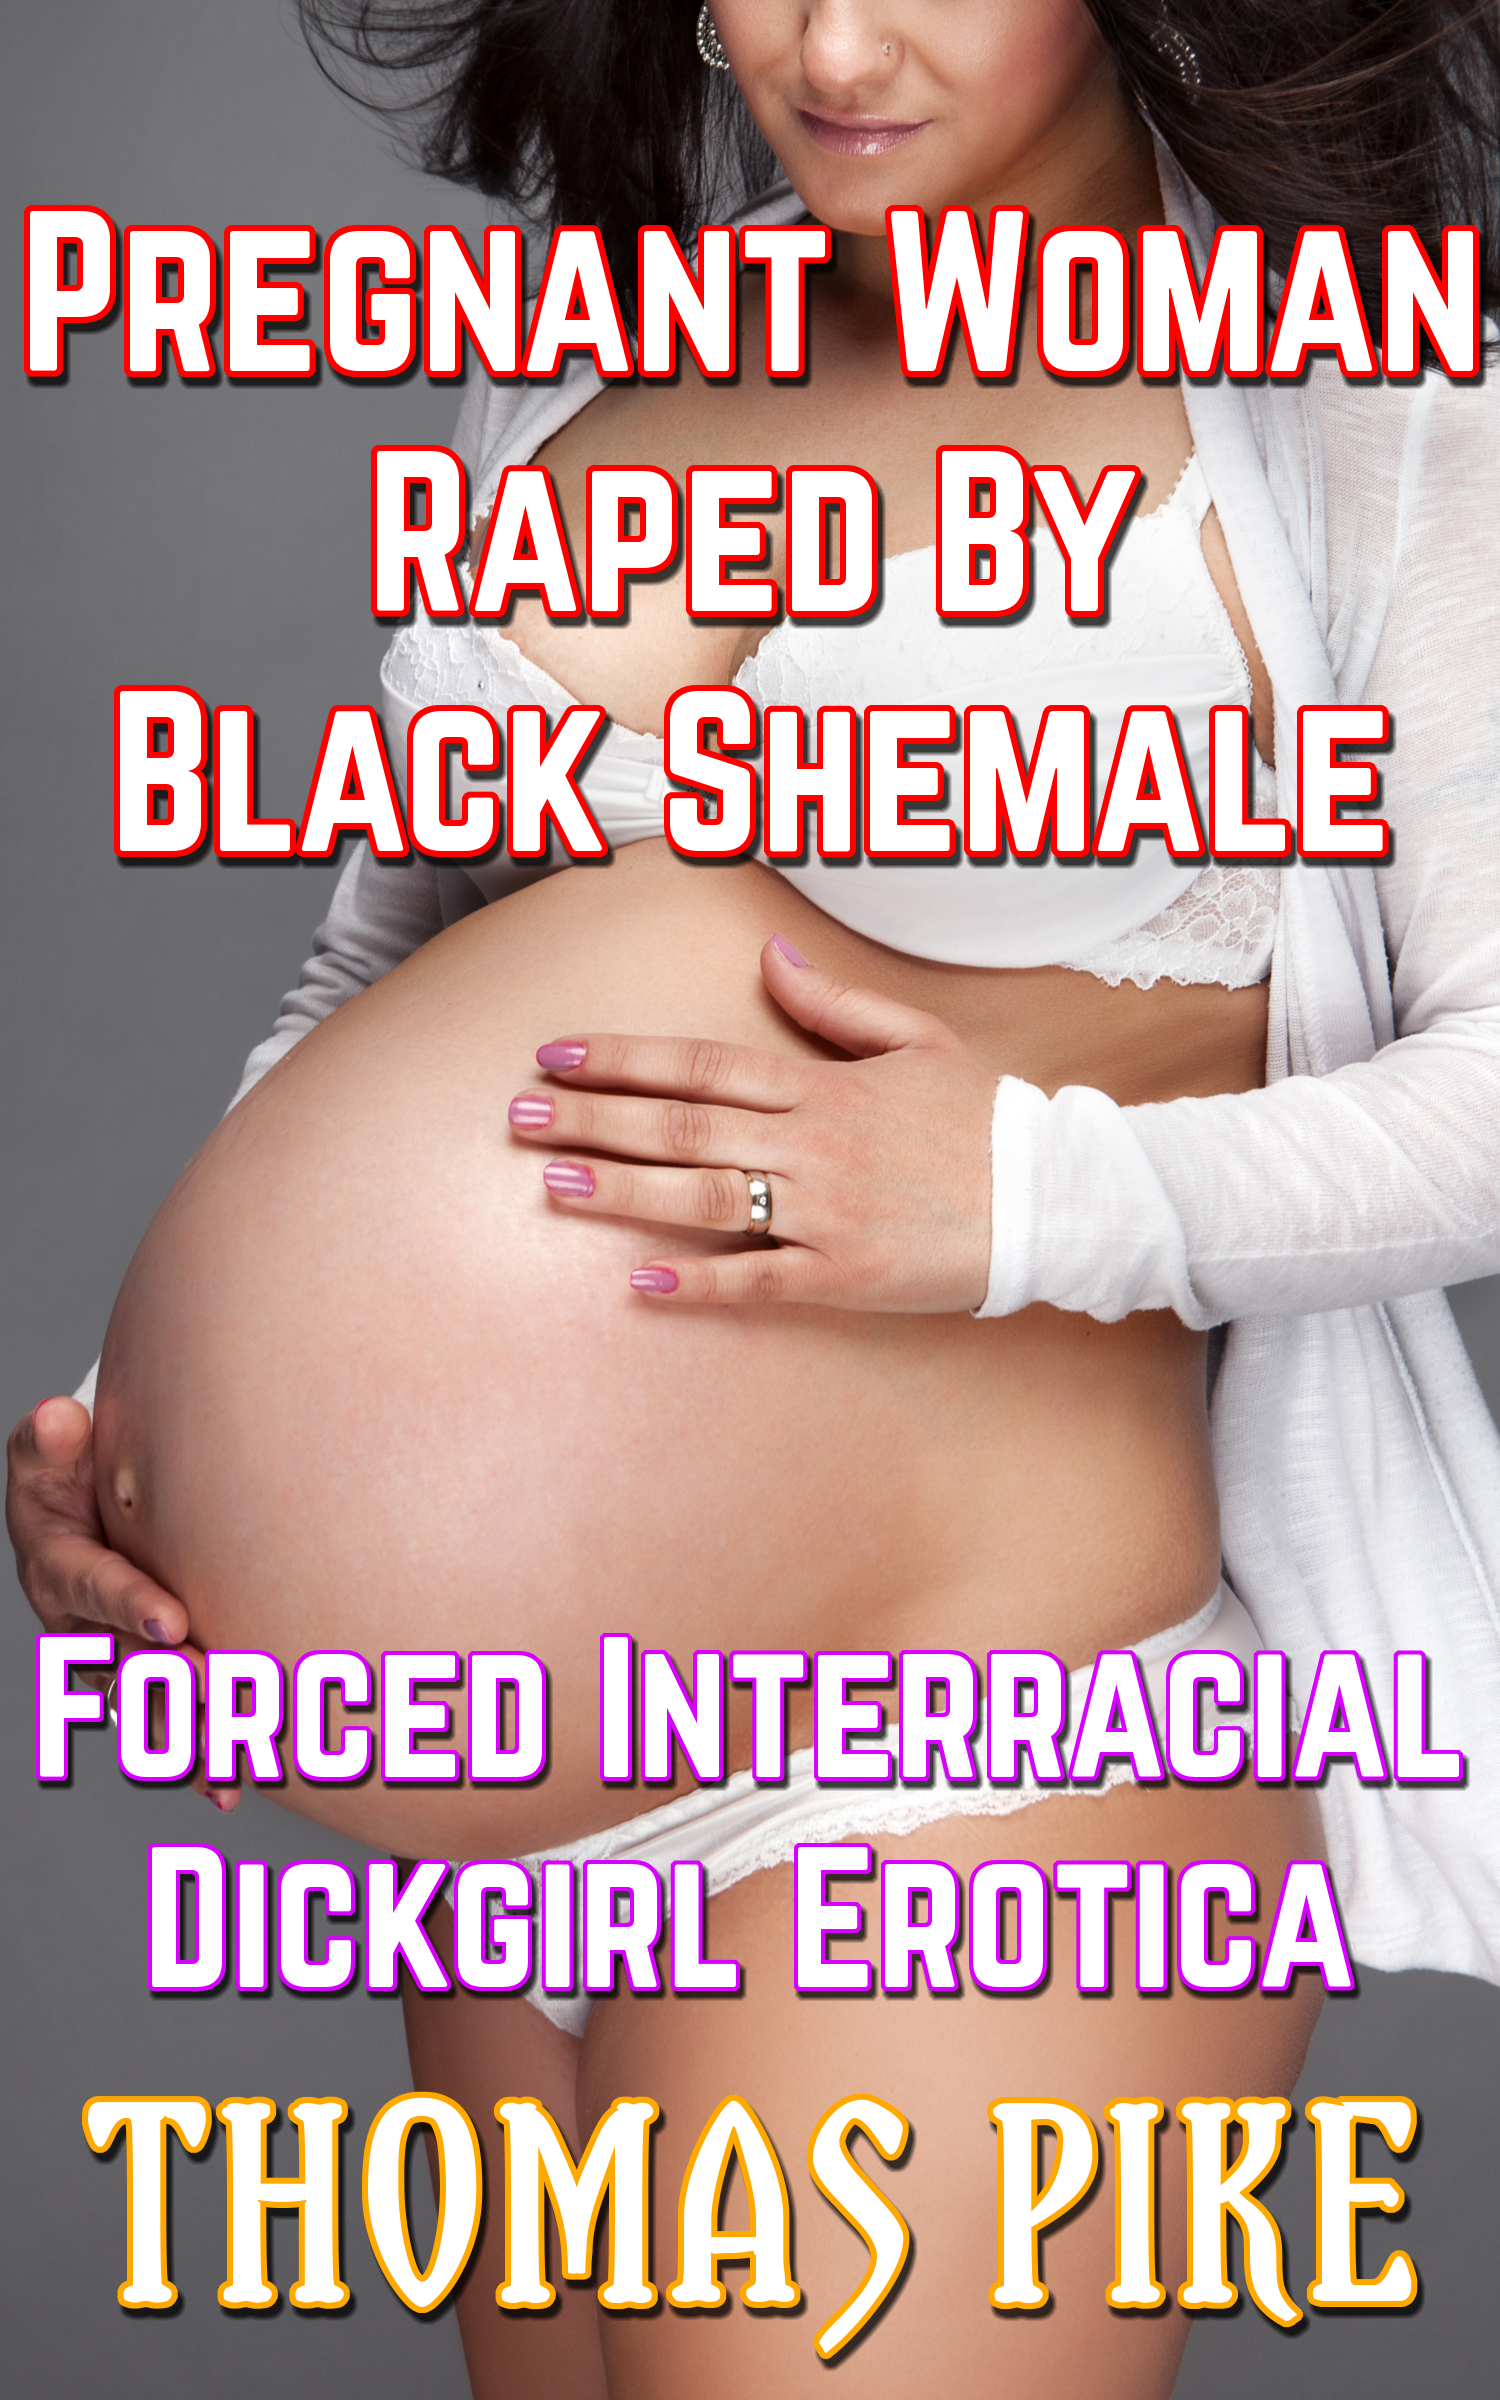 Free lactating shemale video